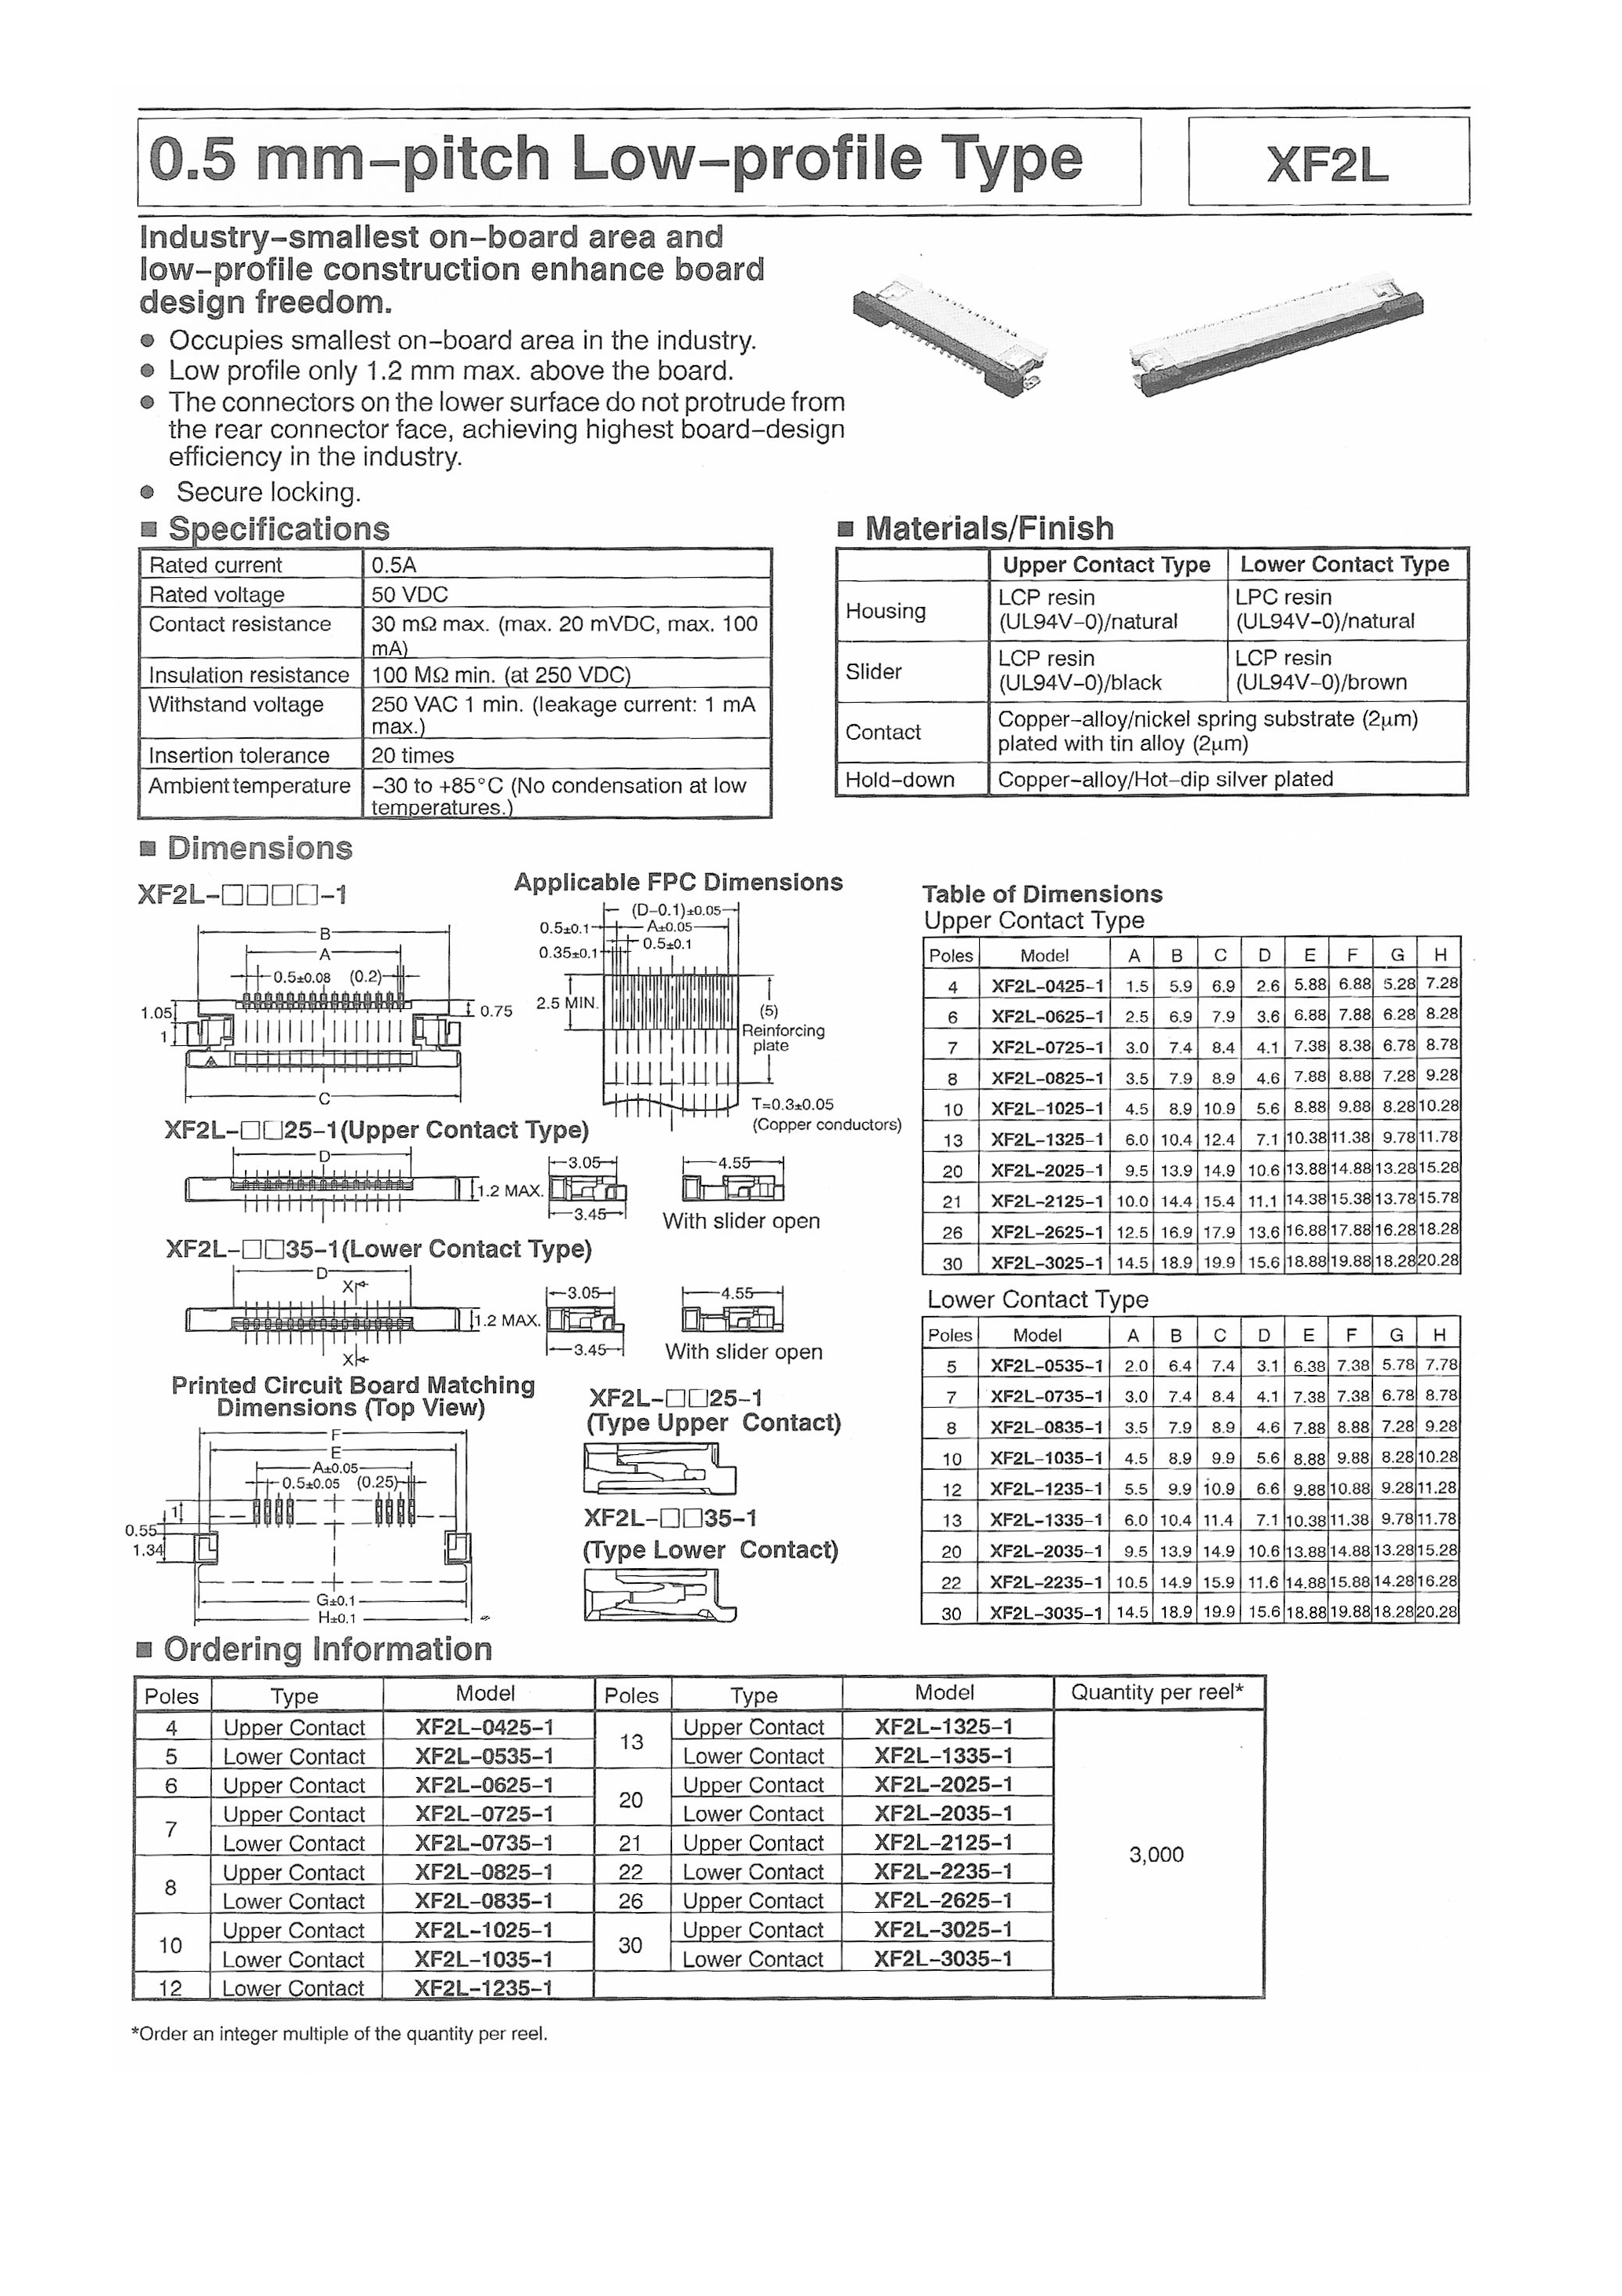 Datasheet XF2L - 0.5MM PITCH LOW PROFILE TYPE page 1